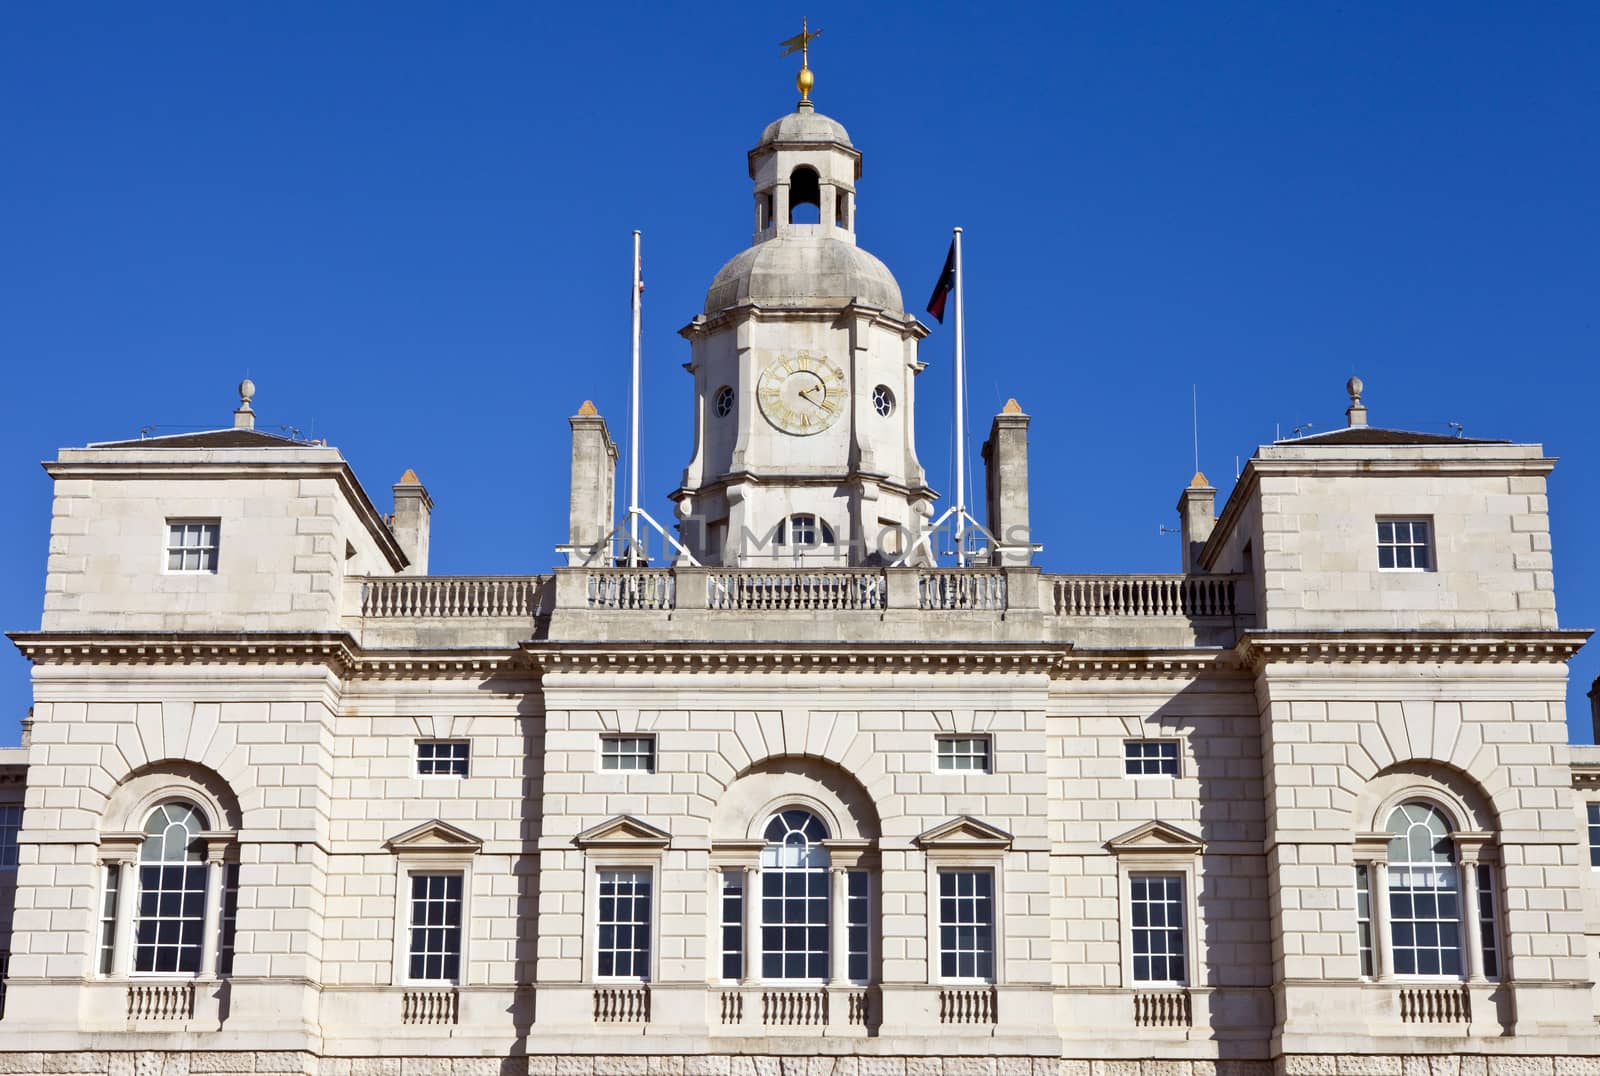 The main building at Horseguard's Parade in London.